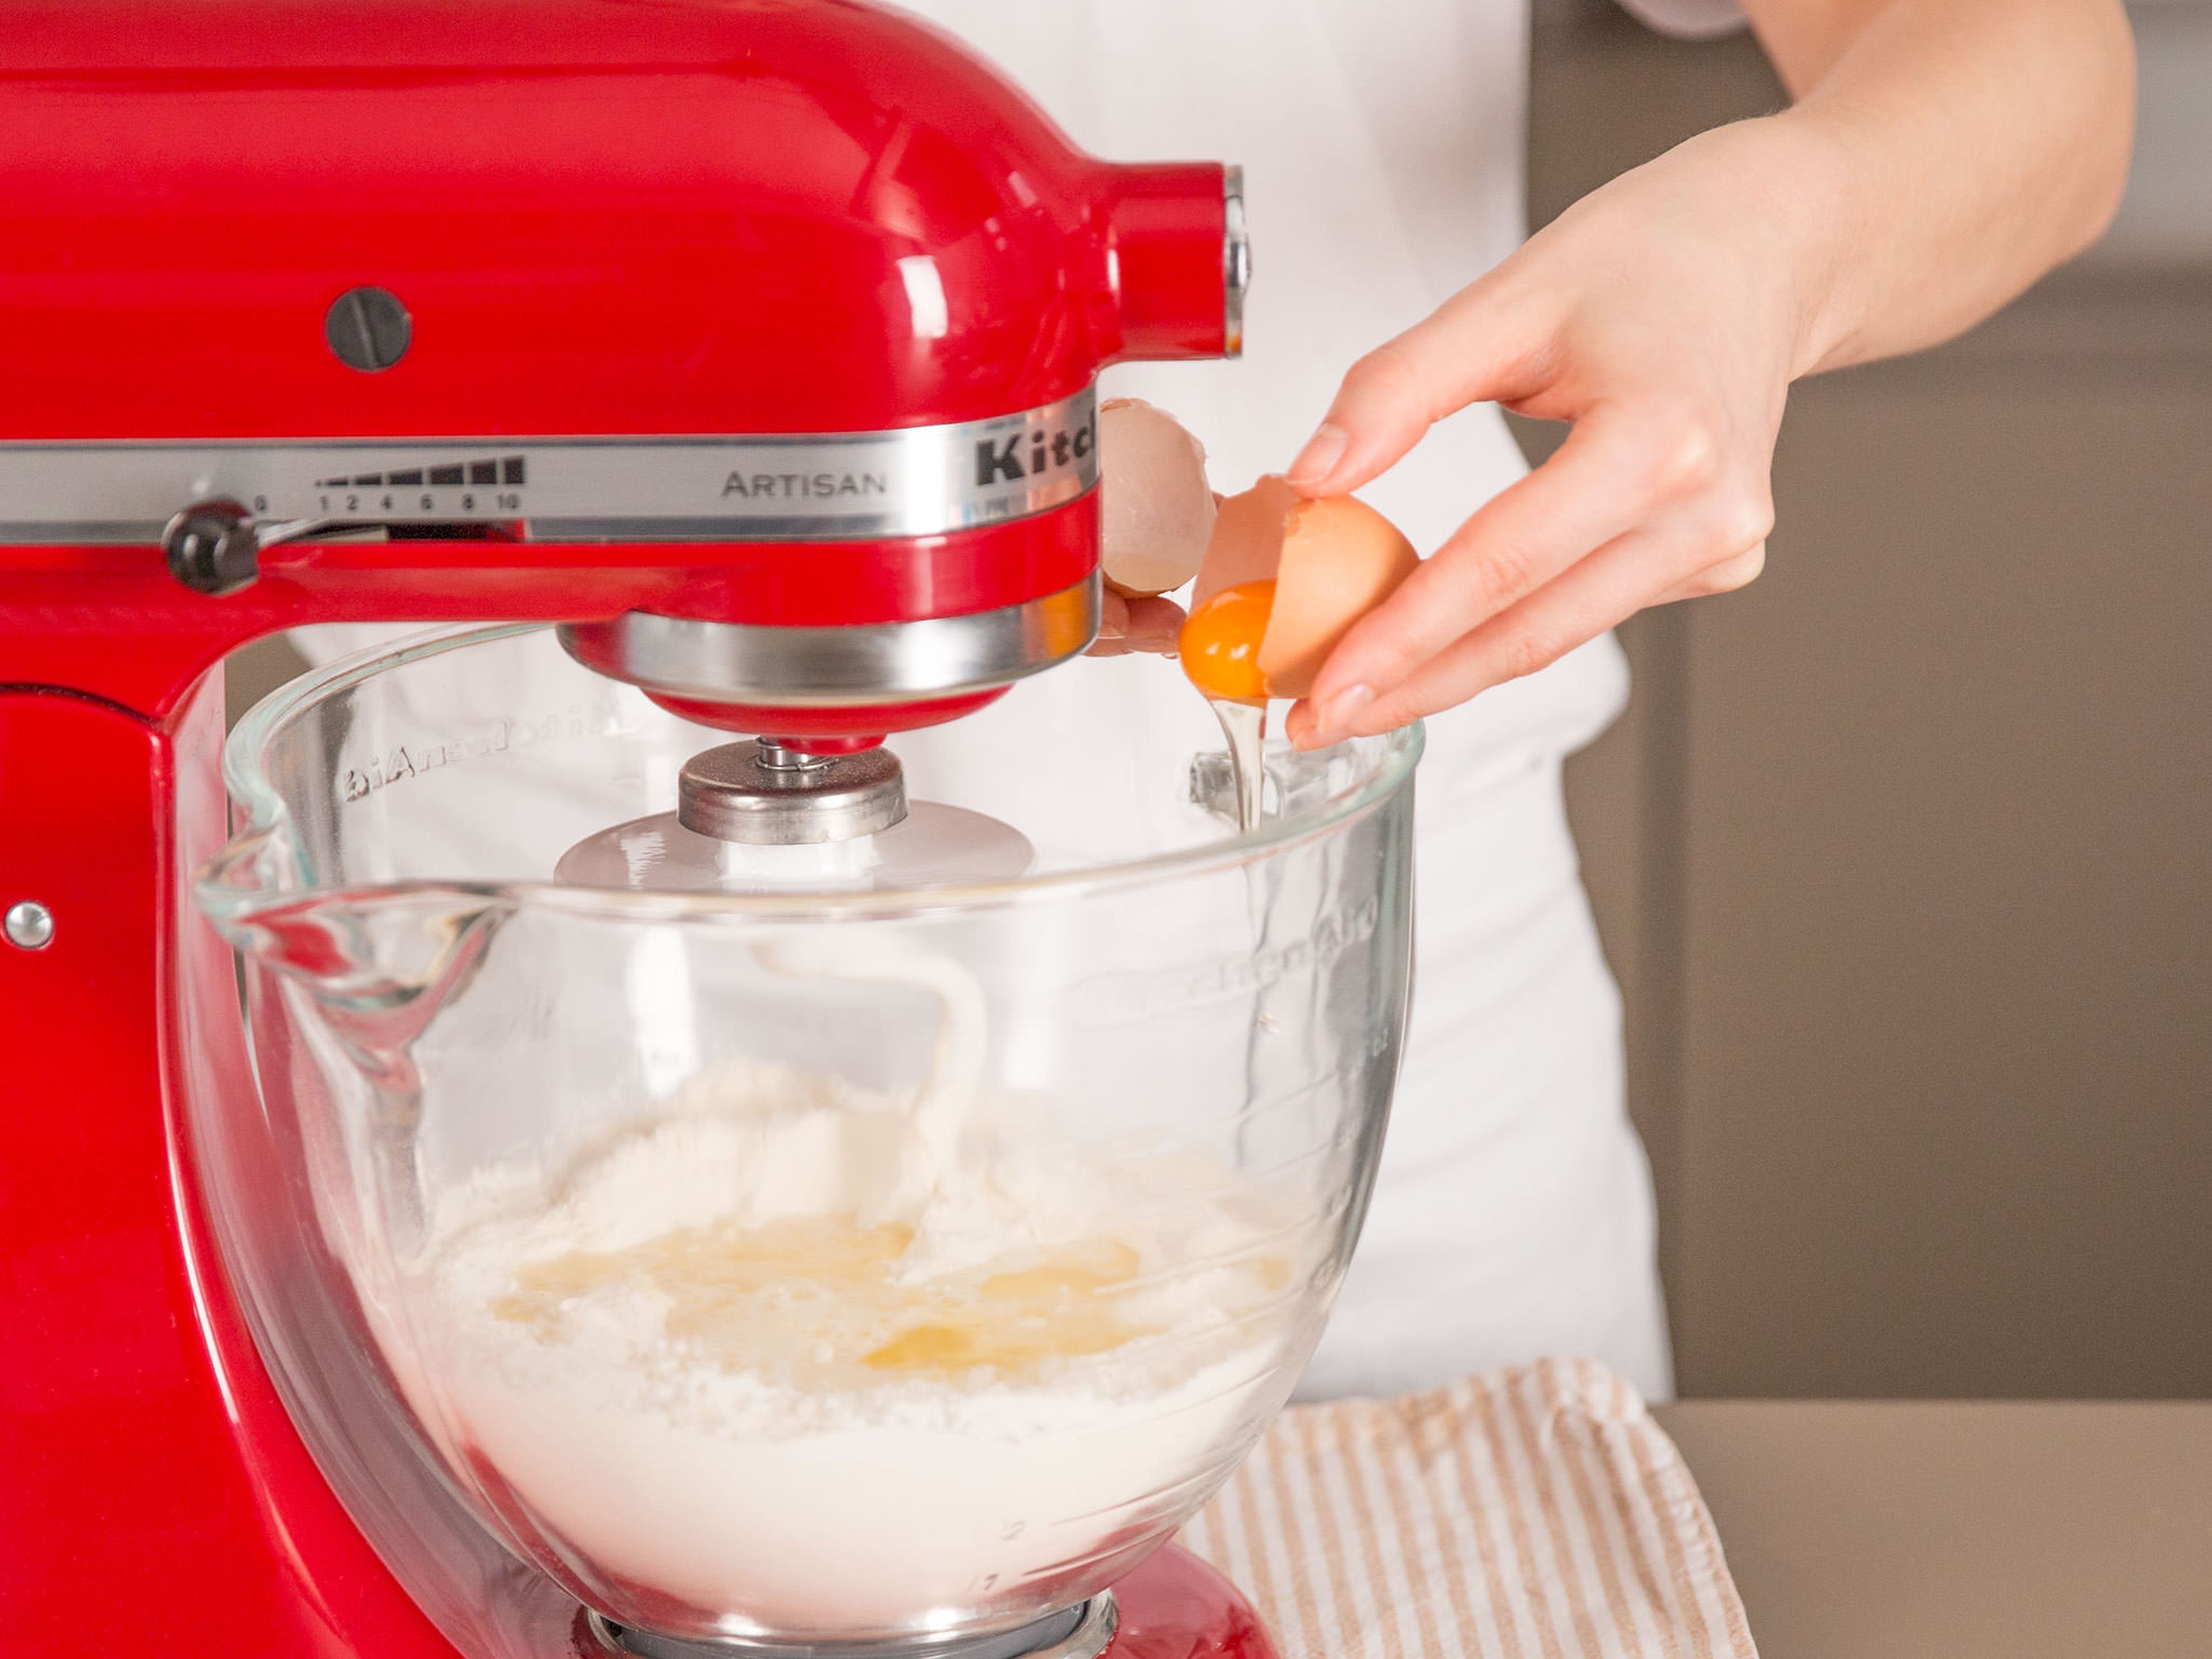 In a stand mixer, beat together flour, sugar, yeast, milk mixture, egg, and a pinch of salt for approx. 2 – 4 min. until a smooth dough forms. Turn out dough onto a floured work surface, gently kneed, return to bowl, cover, and place in a warm place to rise for approx. 90 min.